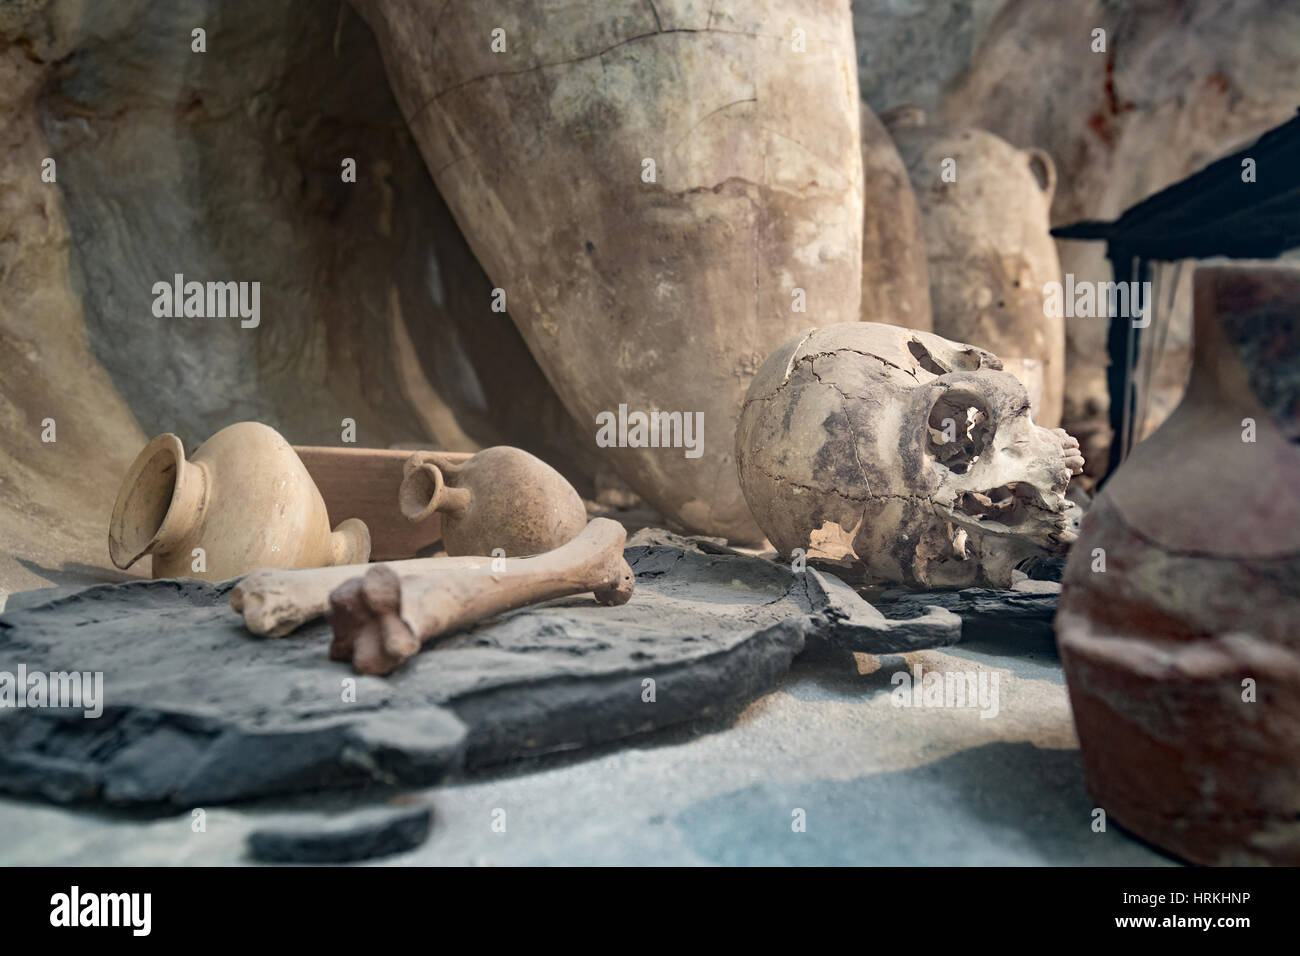 Ancient burial site with a skull and pottery from another milenium Stock Photo